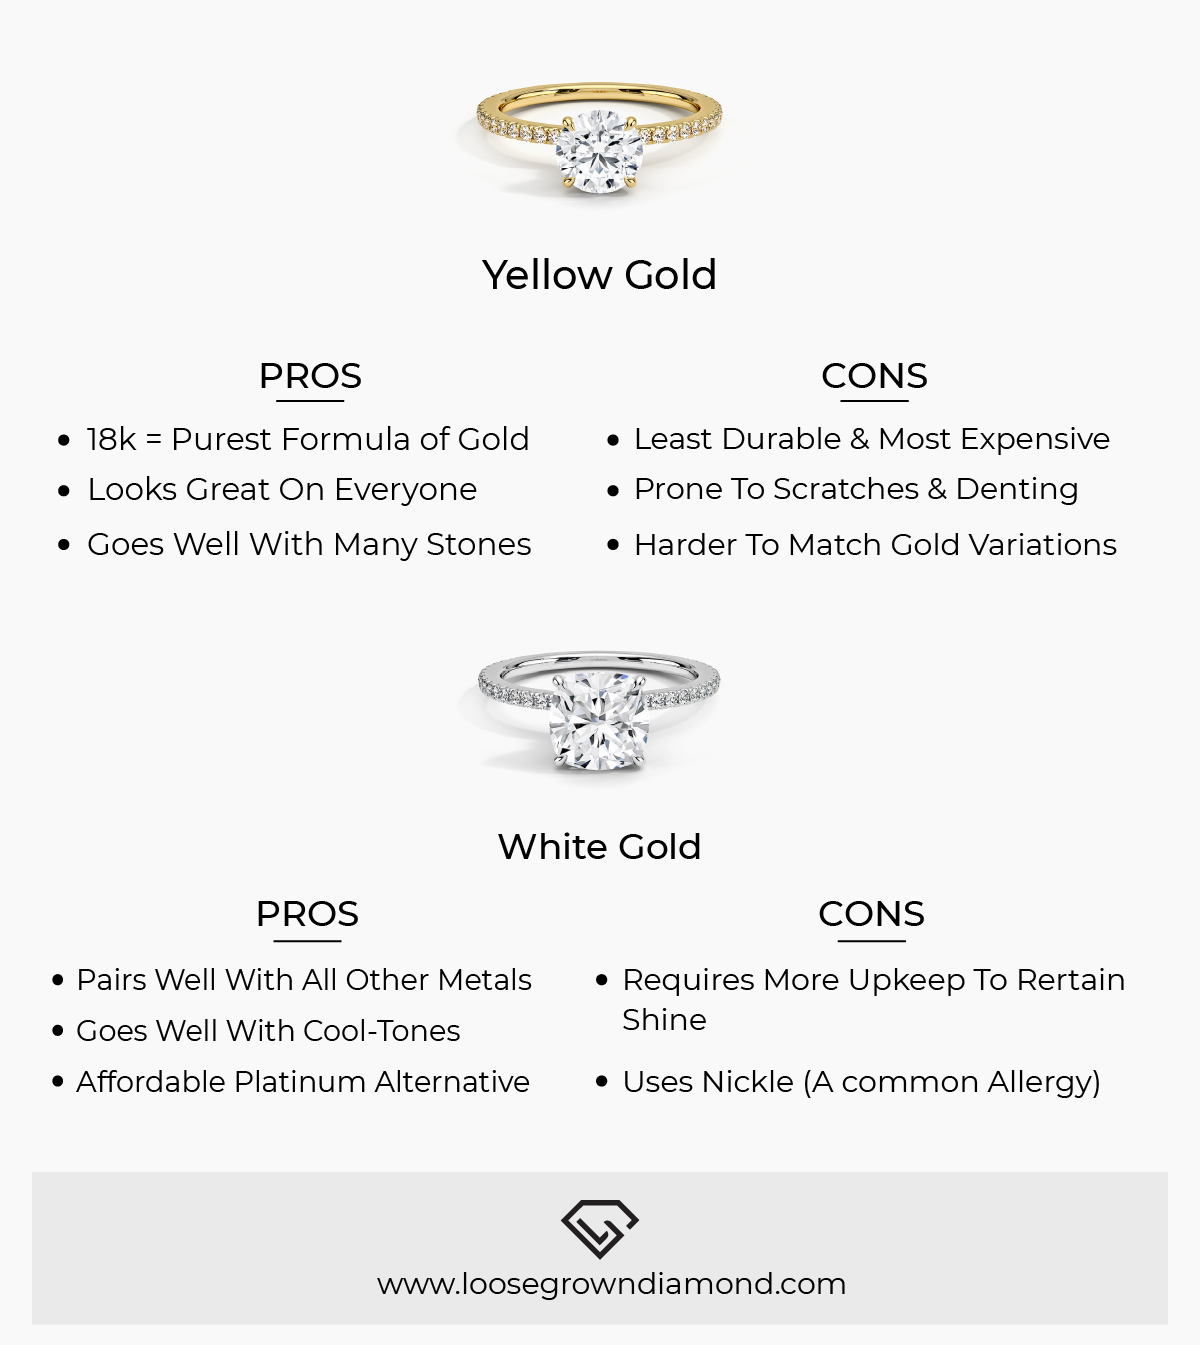 Pros and Cons of White and Yellow Gold